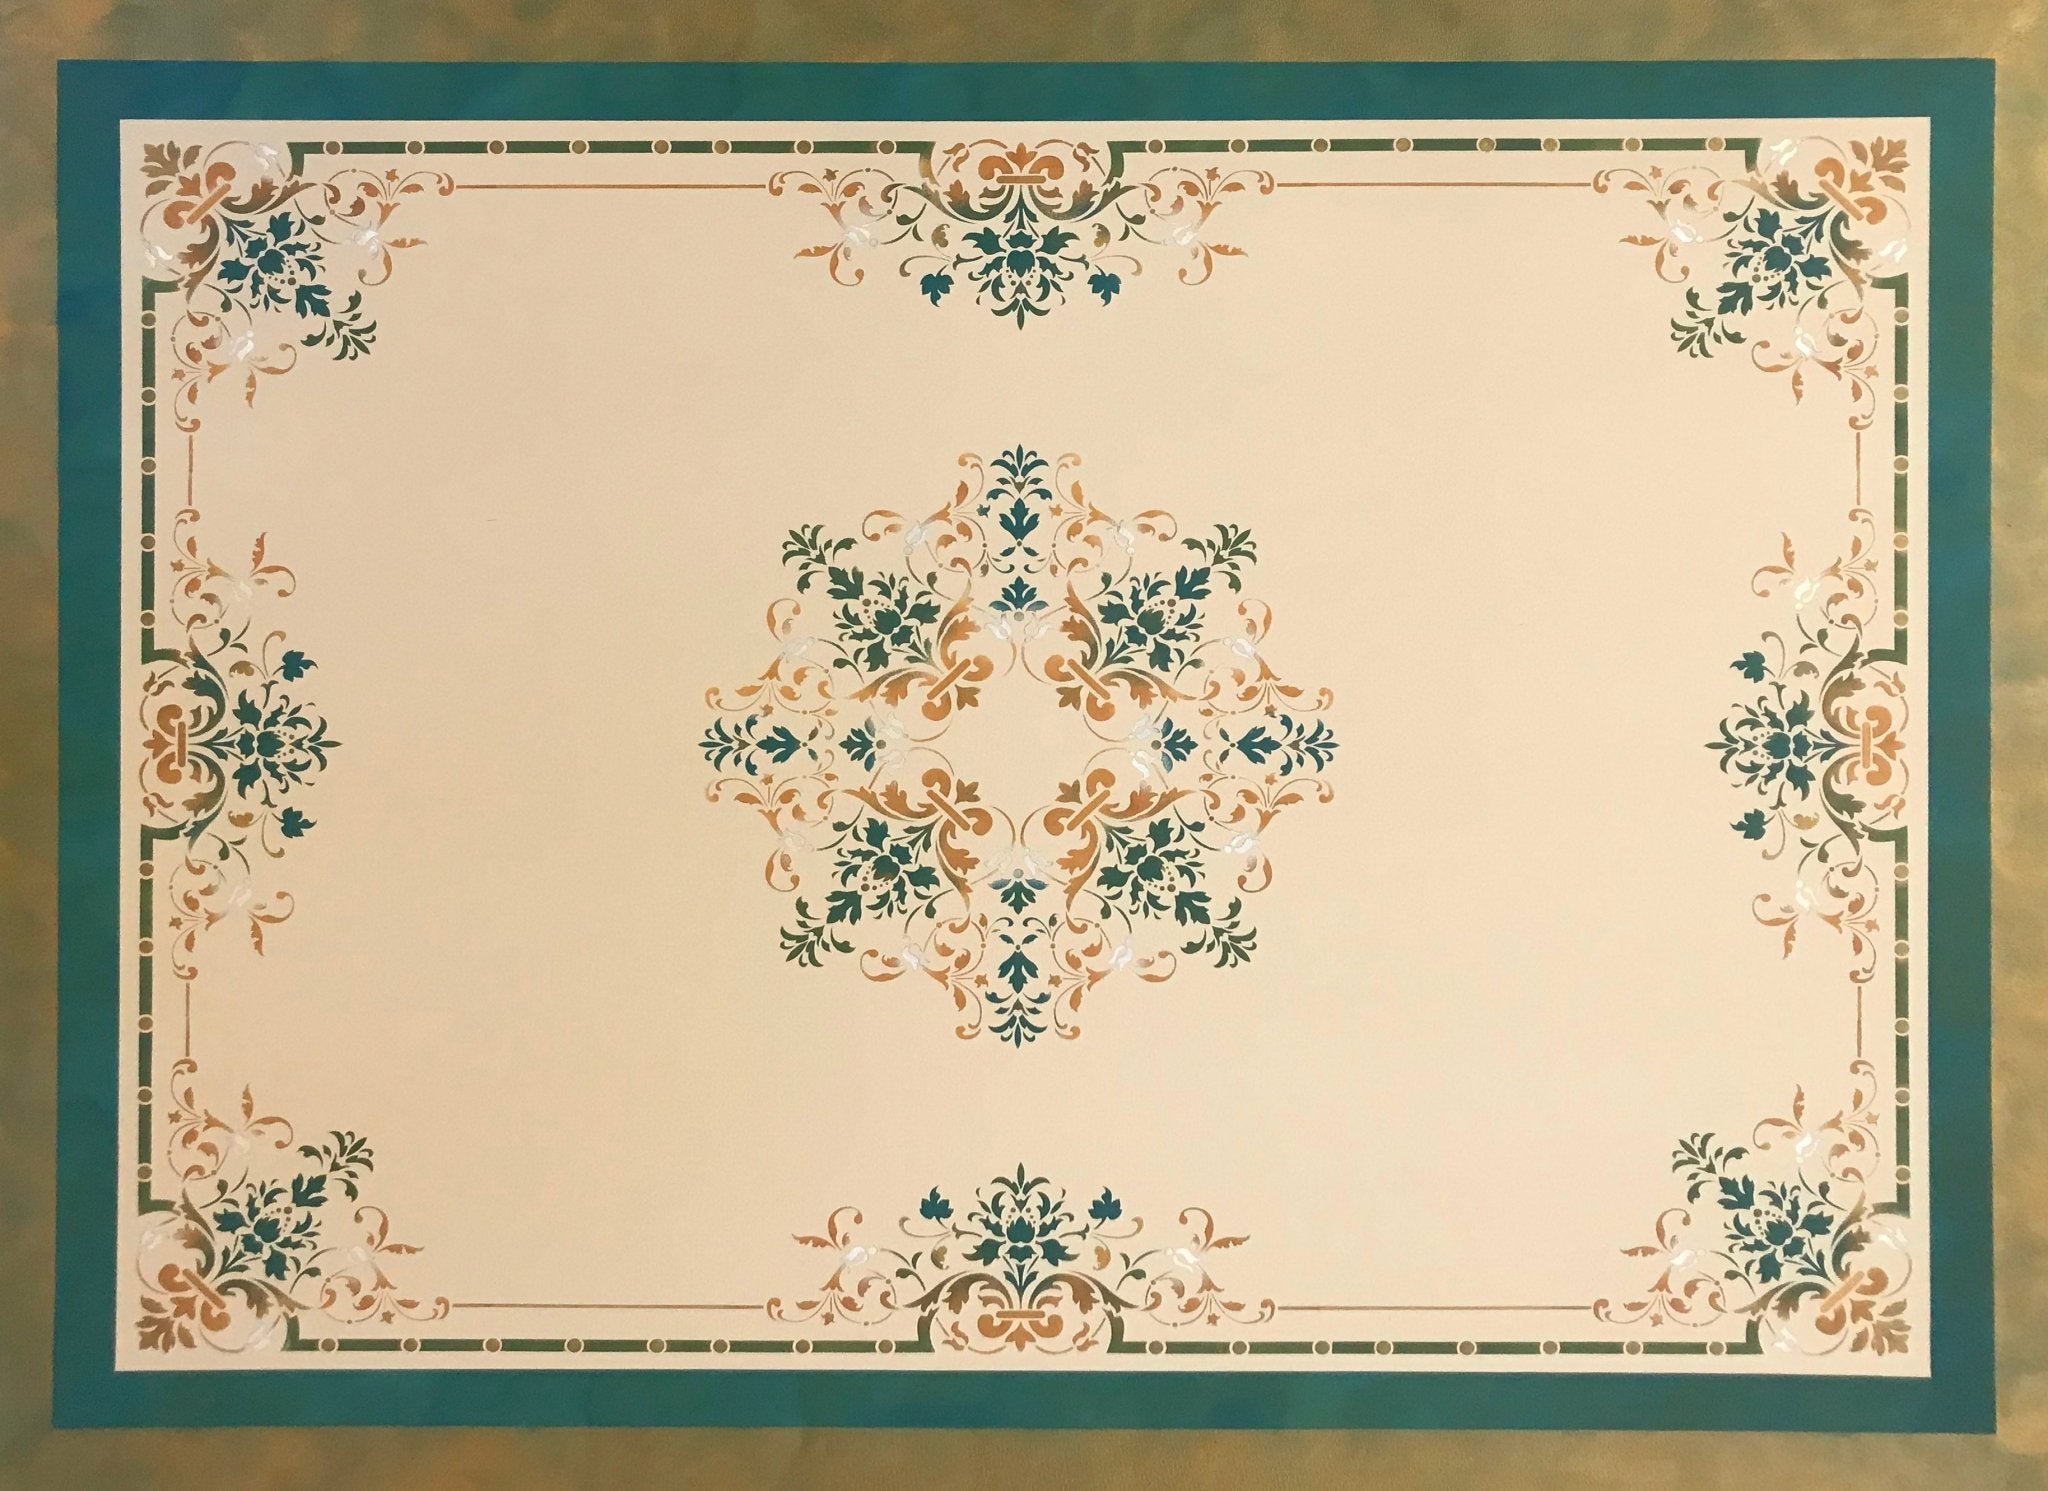 The full image of this floorcloth based on a classic European ceiling design. 